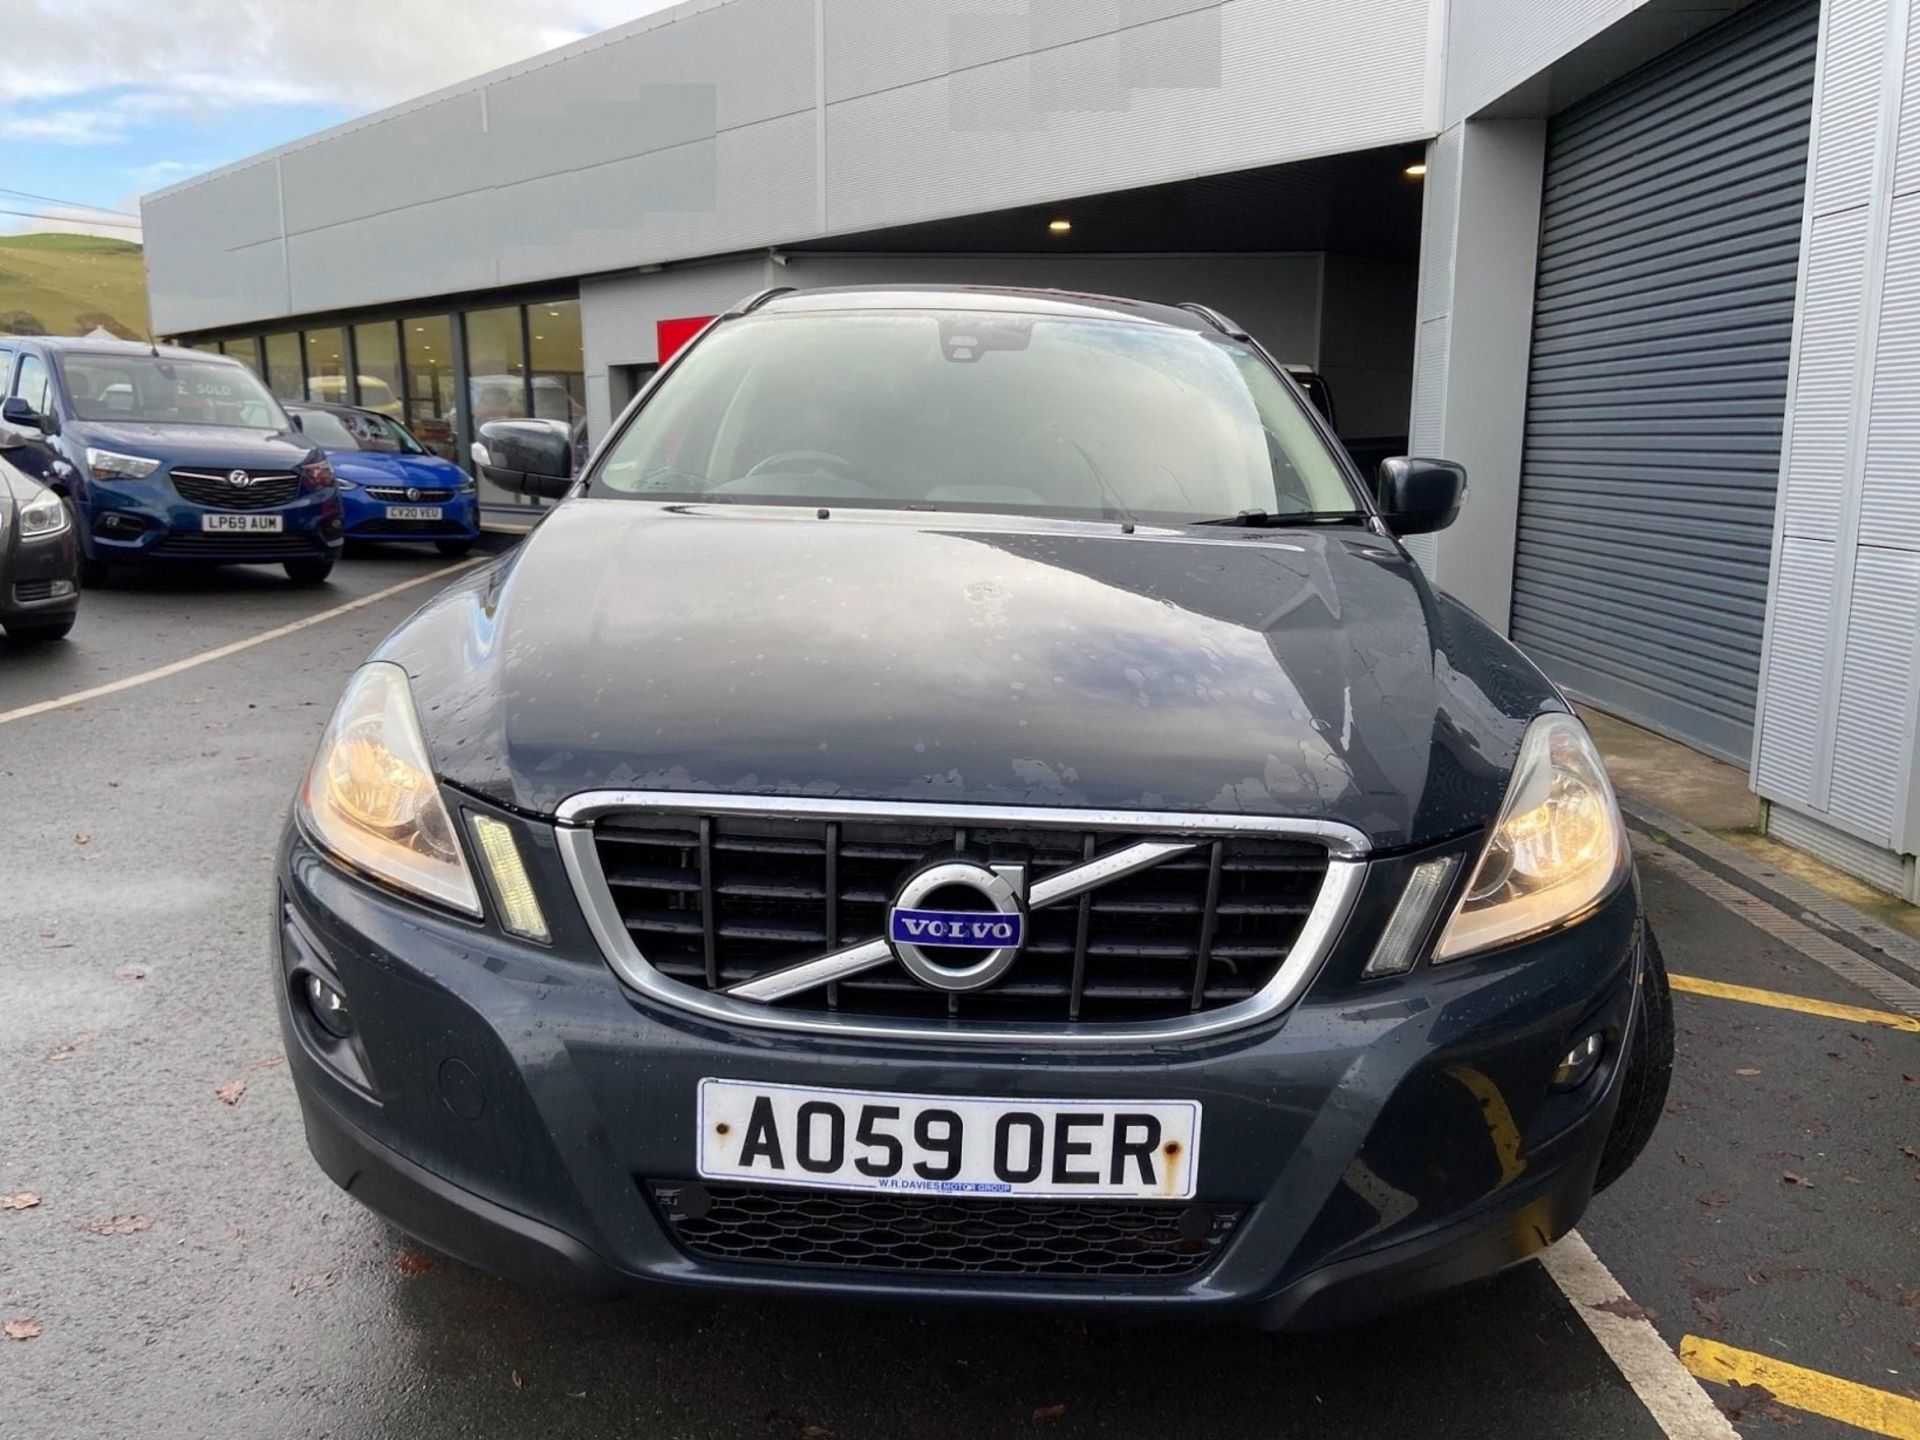 2009 Volvo XC60 2.4 D5 SE SUV 5dr 4x4 - CL505 - NO VAT ON THE HAMMER - Locatio - Image 4 of 17